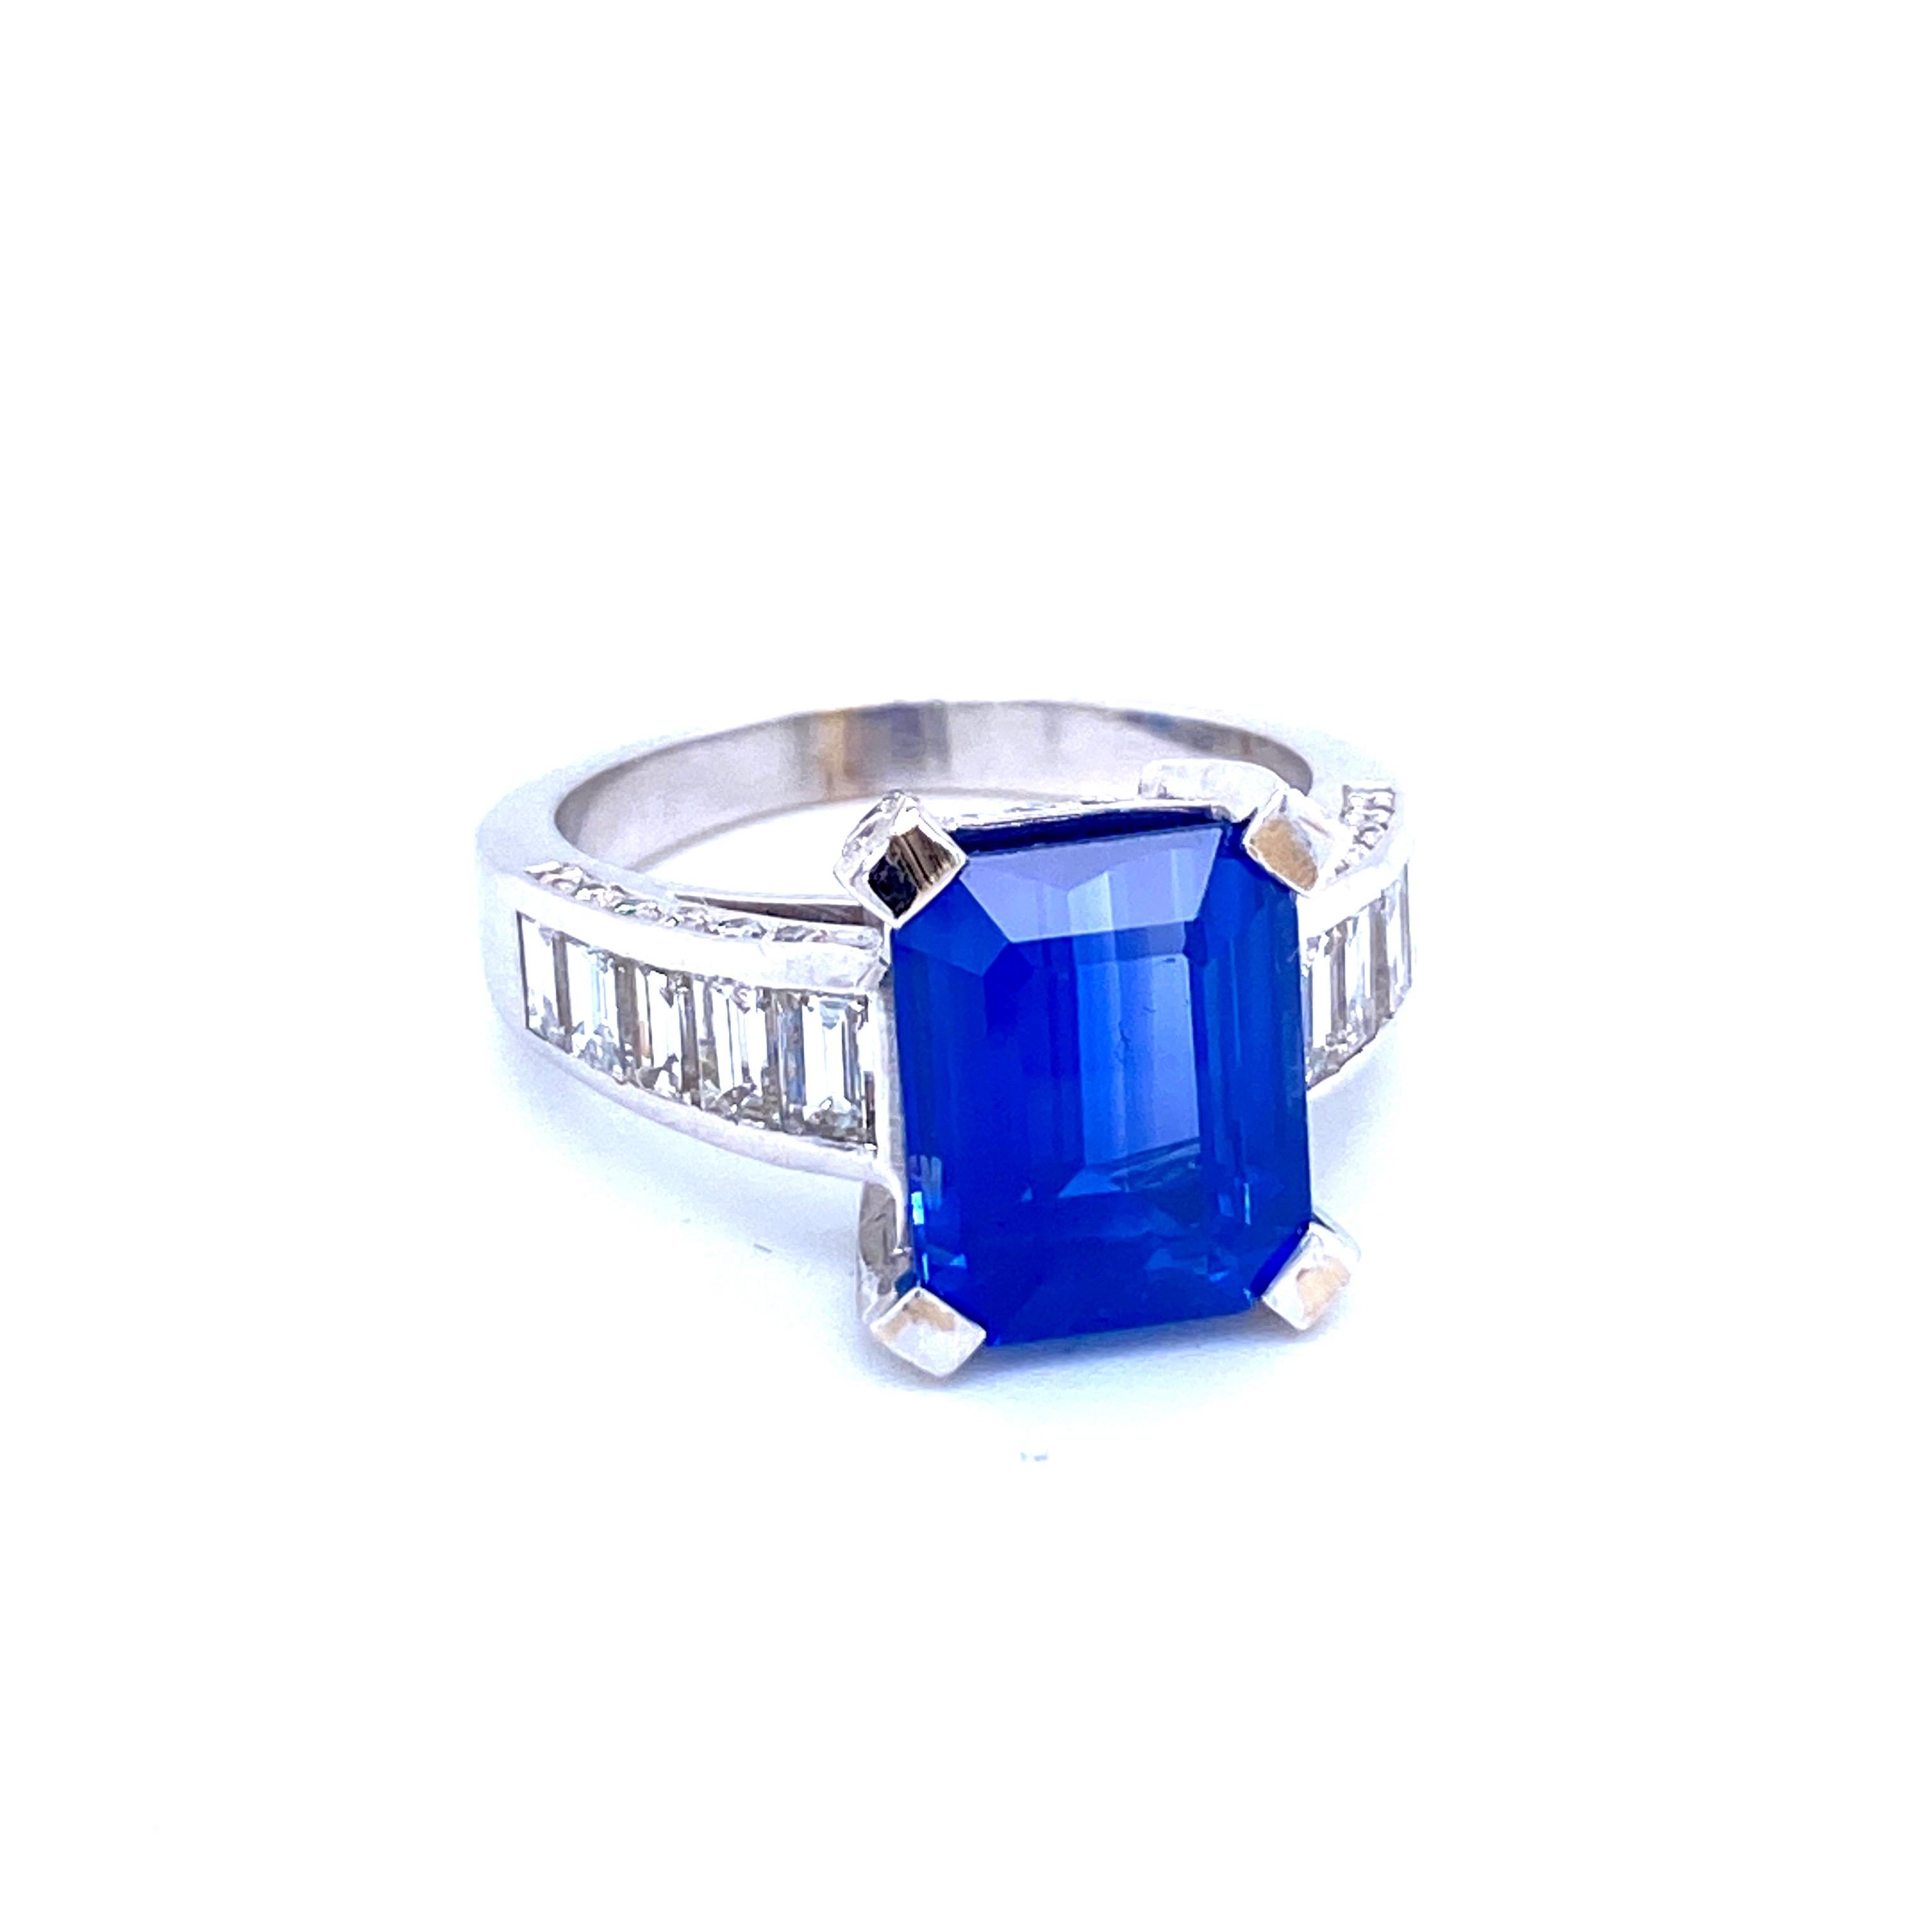 GIA Certified 6.59 Carat Sapphire Diamond Gold Ring In Excellent Condition For Sale In Napoli, Italy